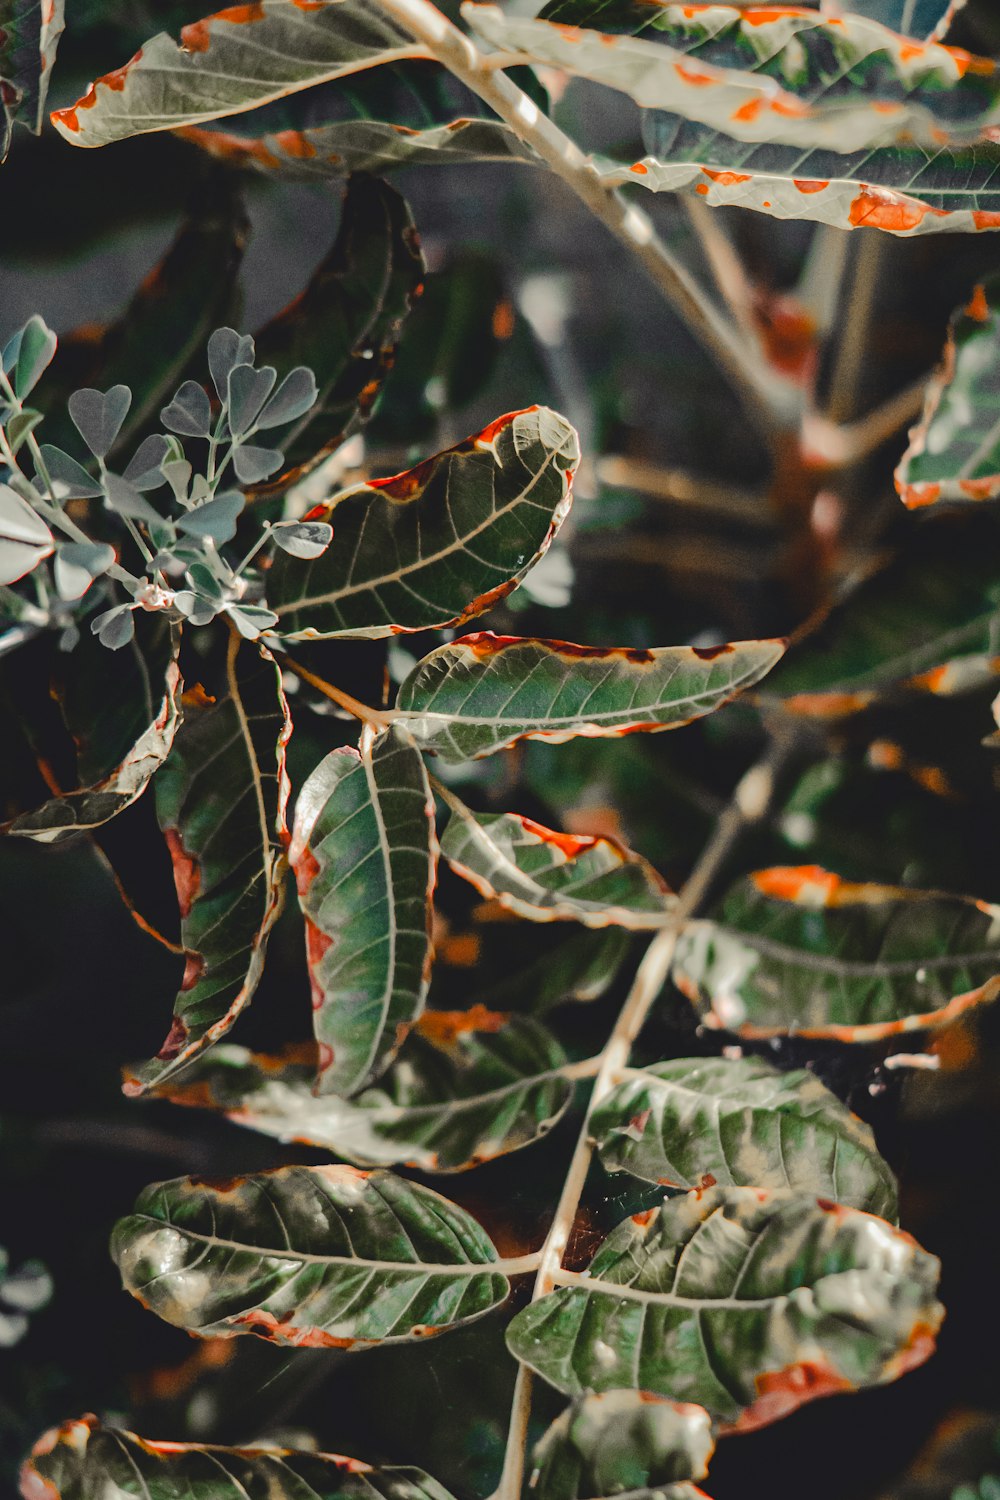 a close up of a leafy plant with red spots